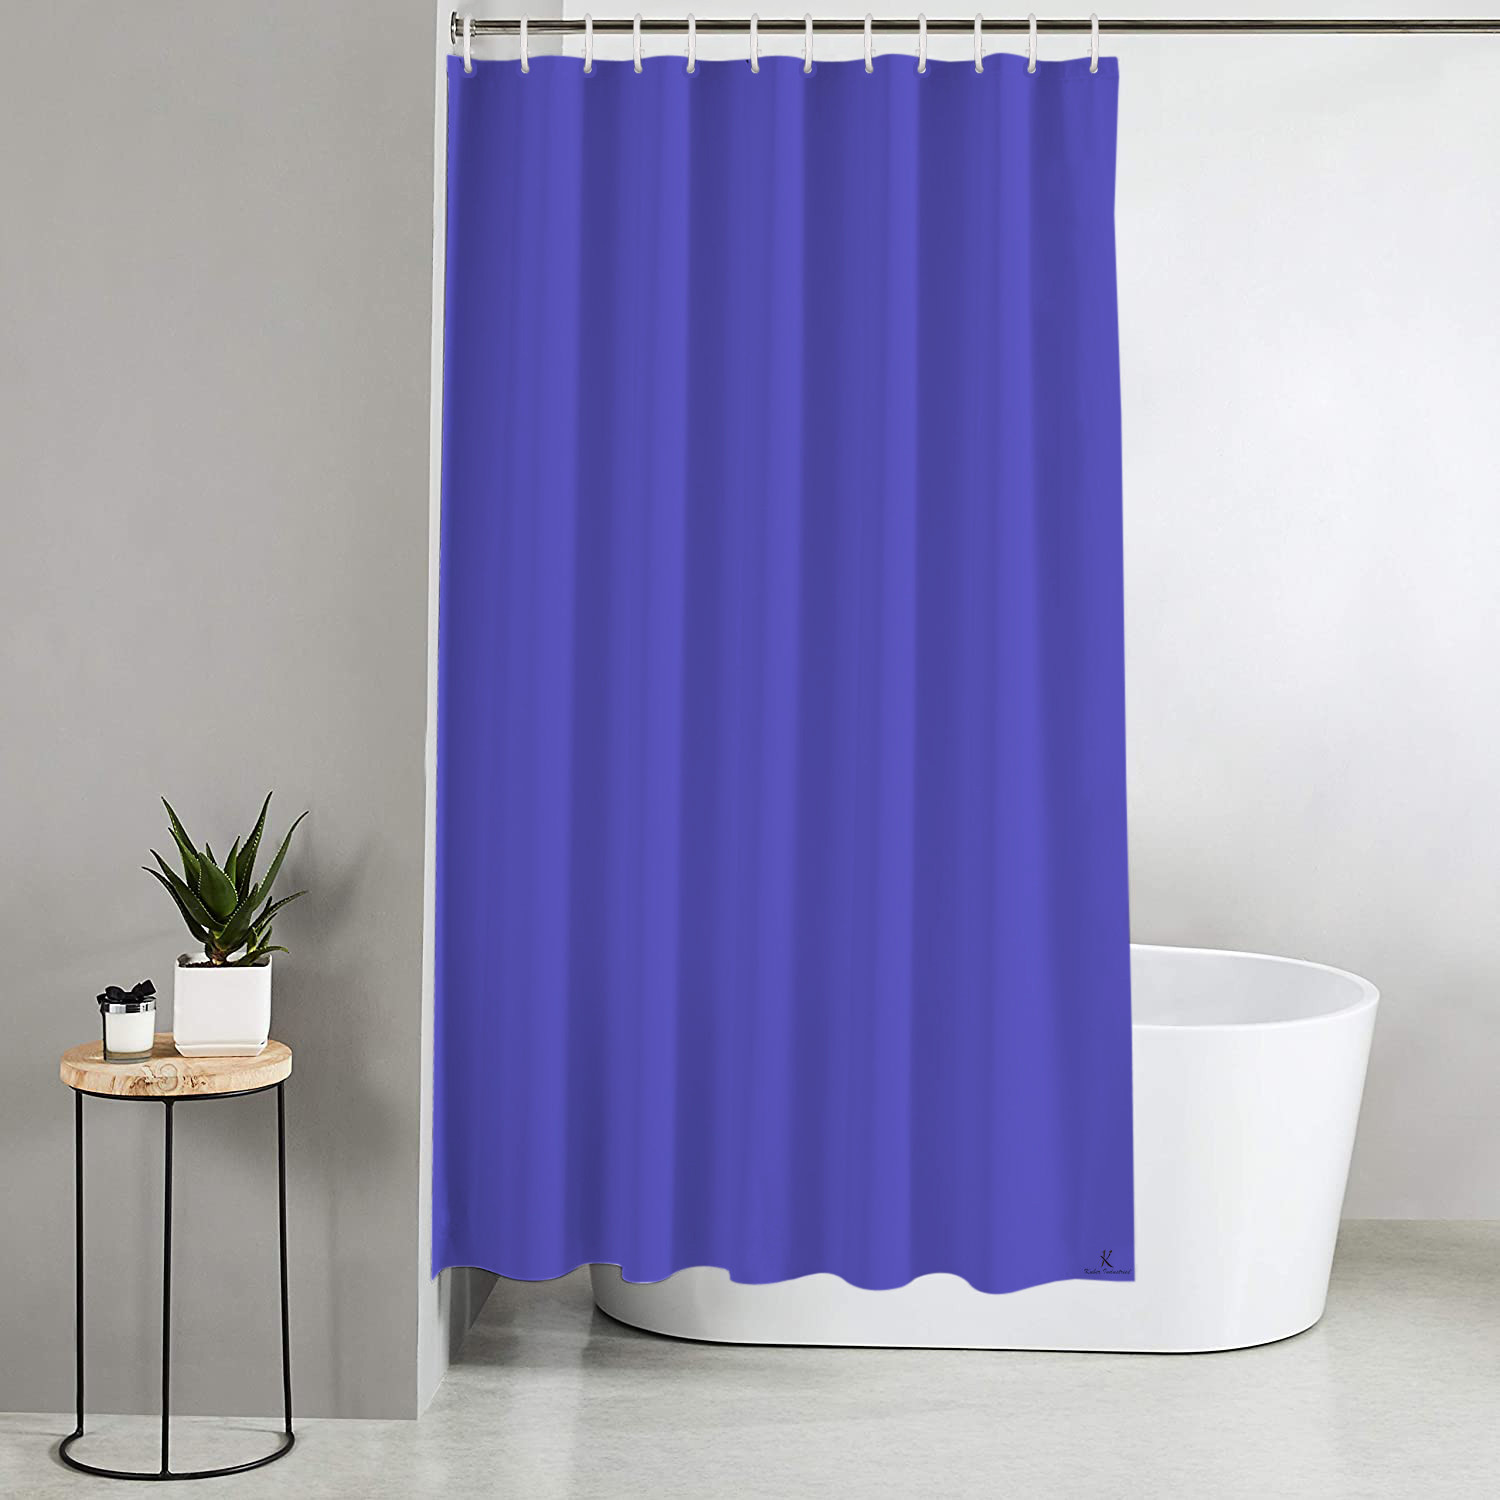 Kuber Industries 2 Pieces PEVA Shower Curtain Liner , Heavy Duty Plastic Shower Curtain With Hooks for Bathroom, Bathtub, 70